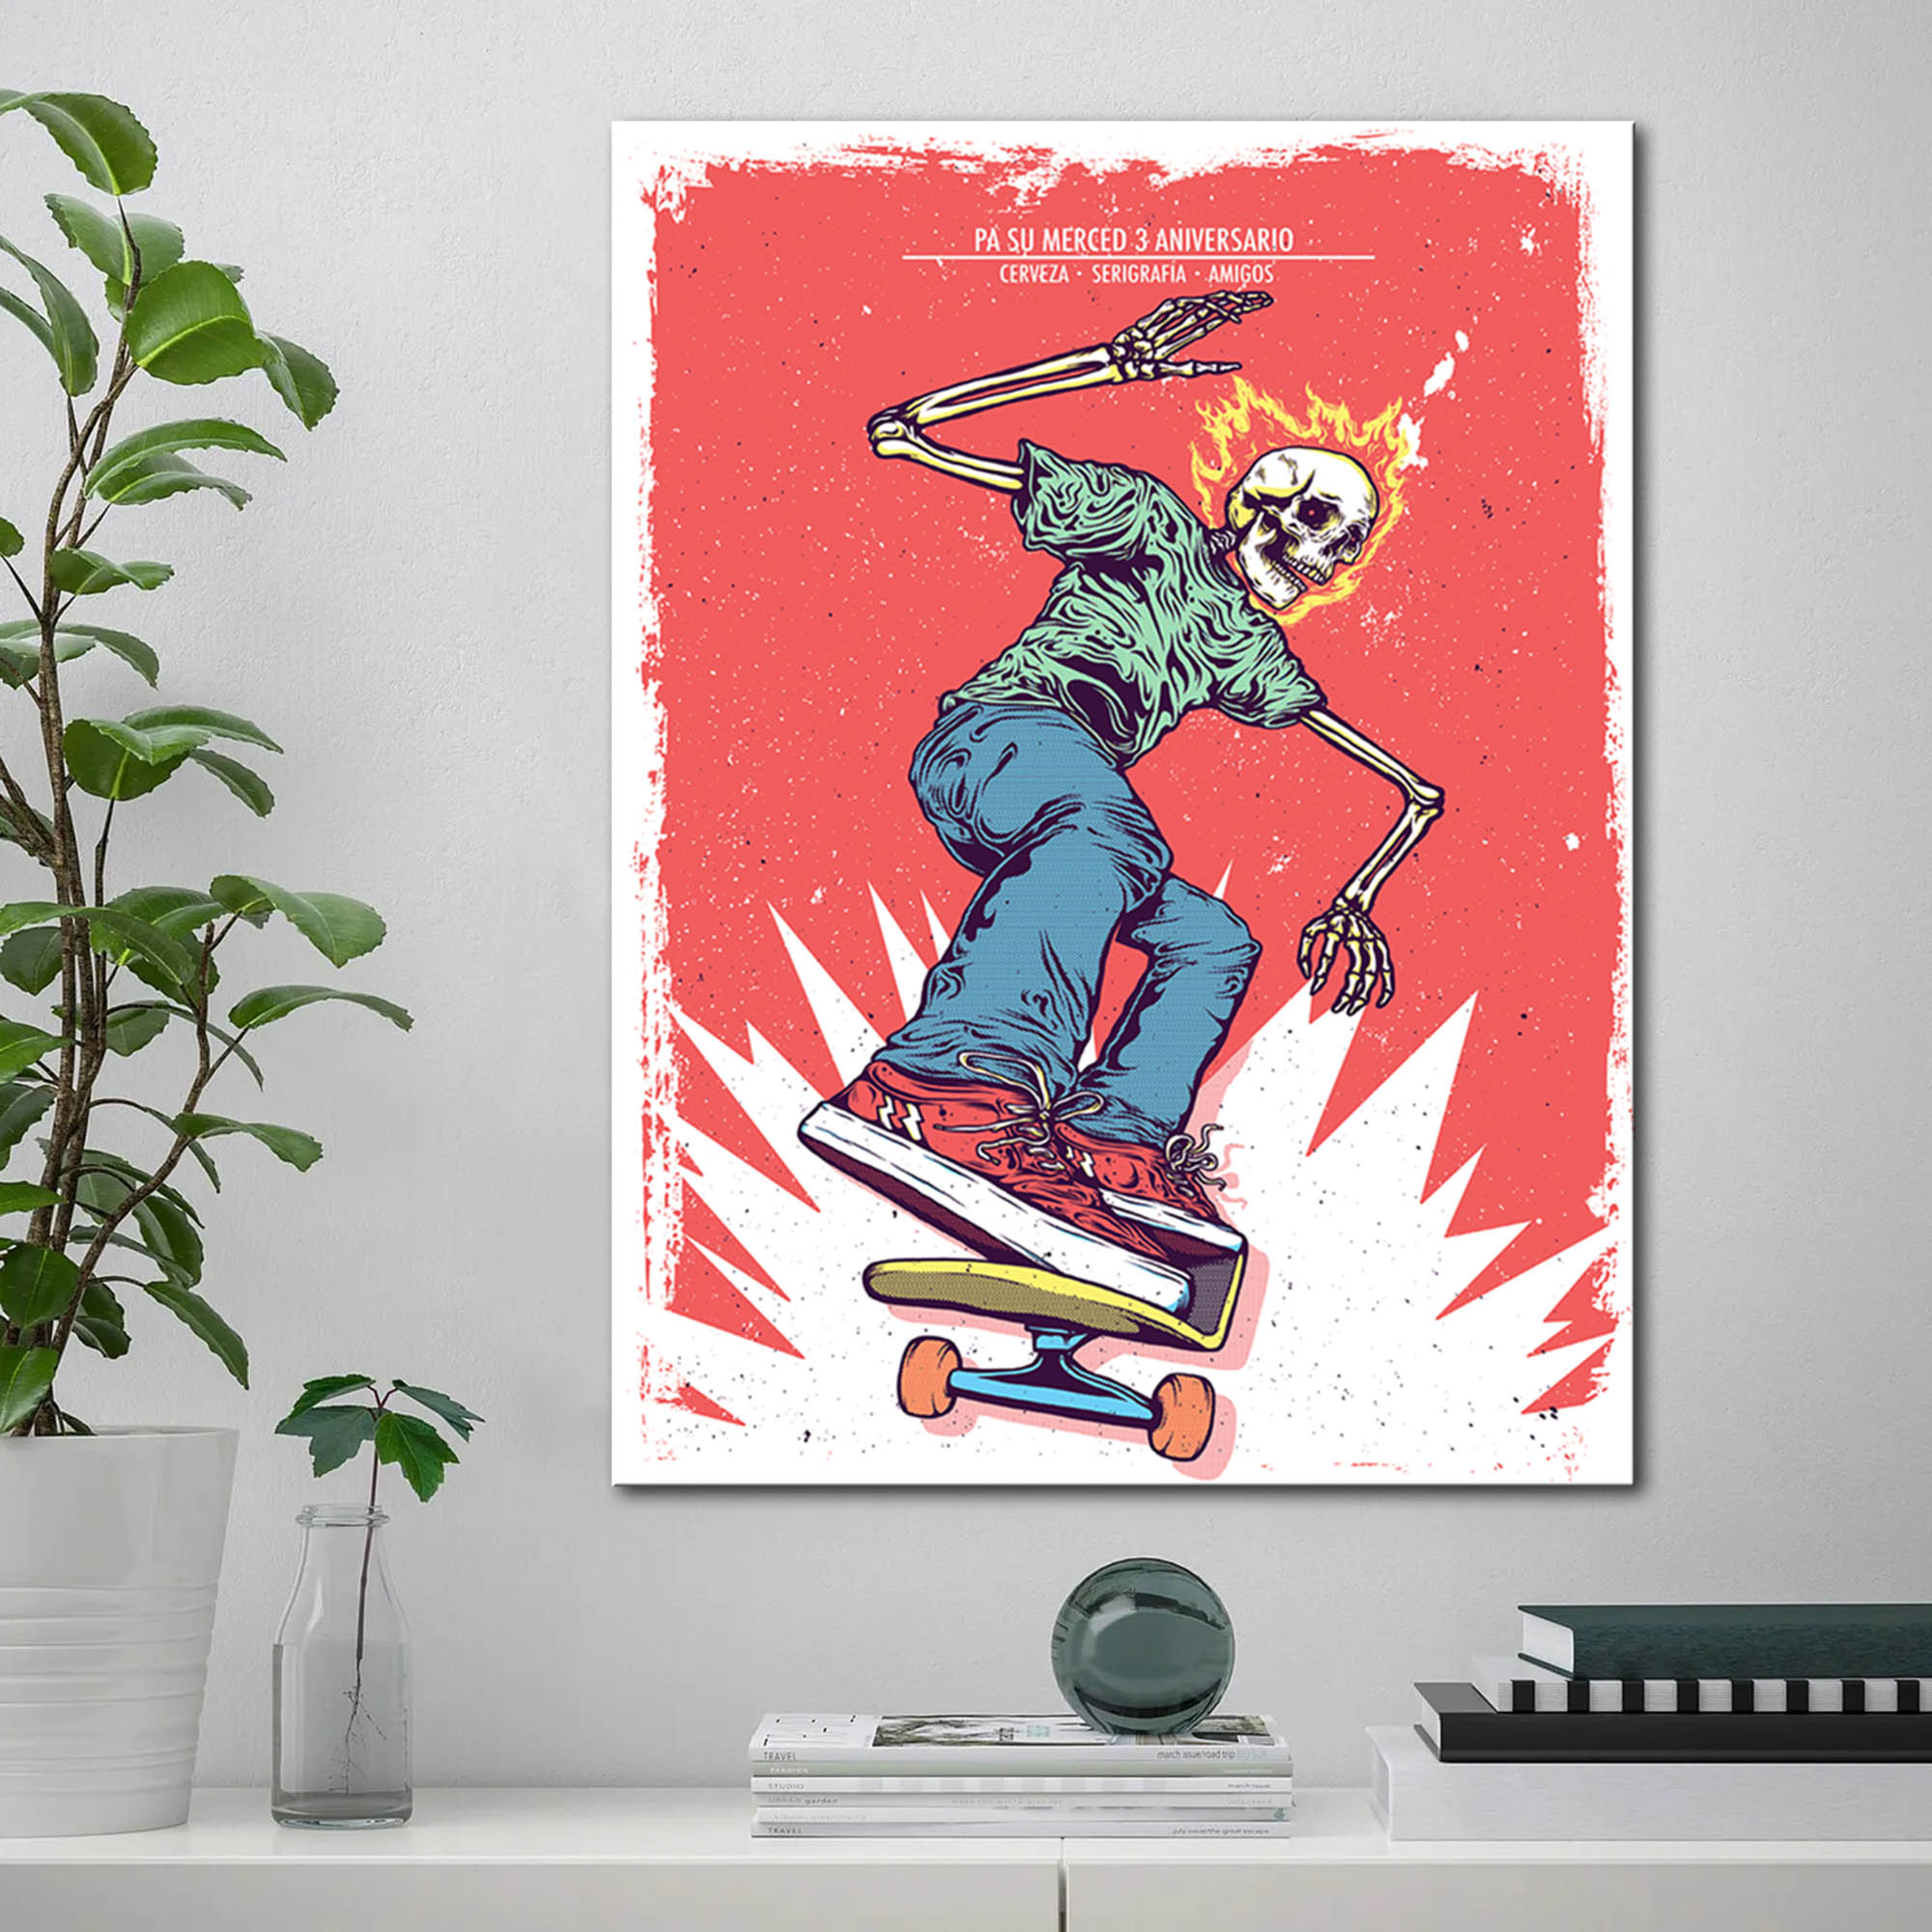 OMY | Surf & Skate Giant Coloring Poster | Giant Coloring Poster